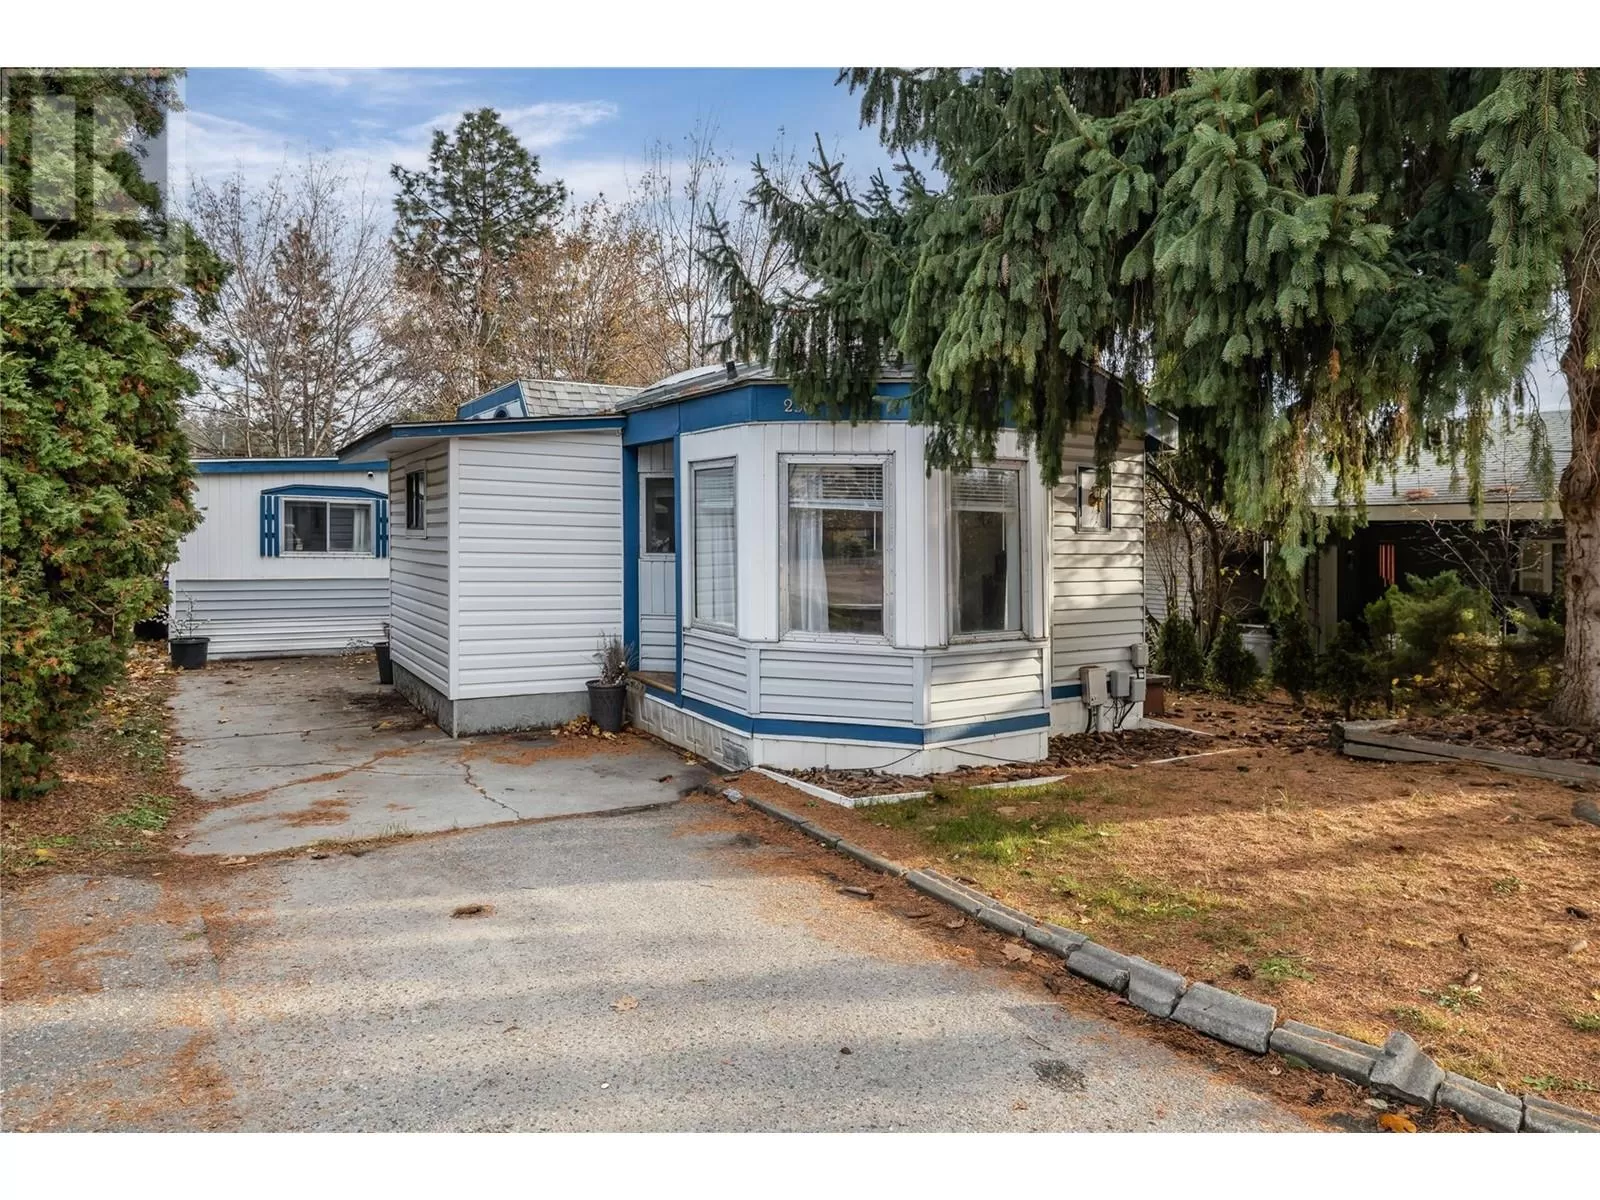 Manufactured Home for rent: 2001 Highway 97s Highway Unit# 238, West Kelowna, British Columbia V1Z 3E3